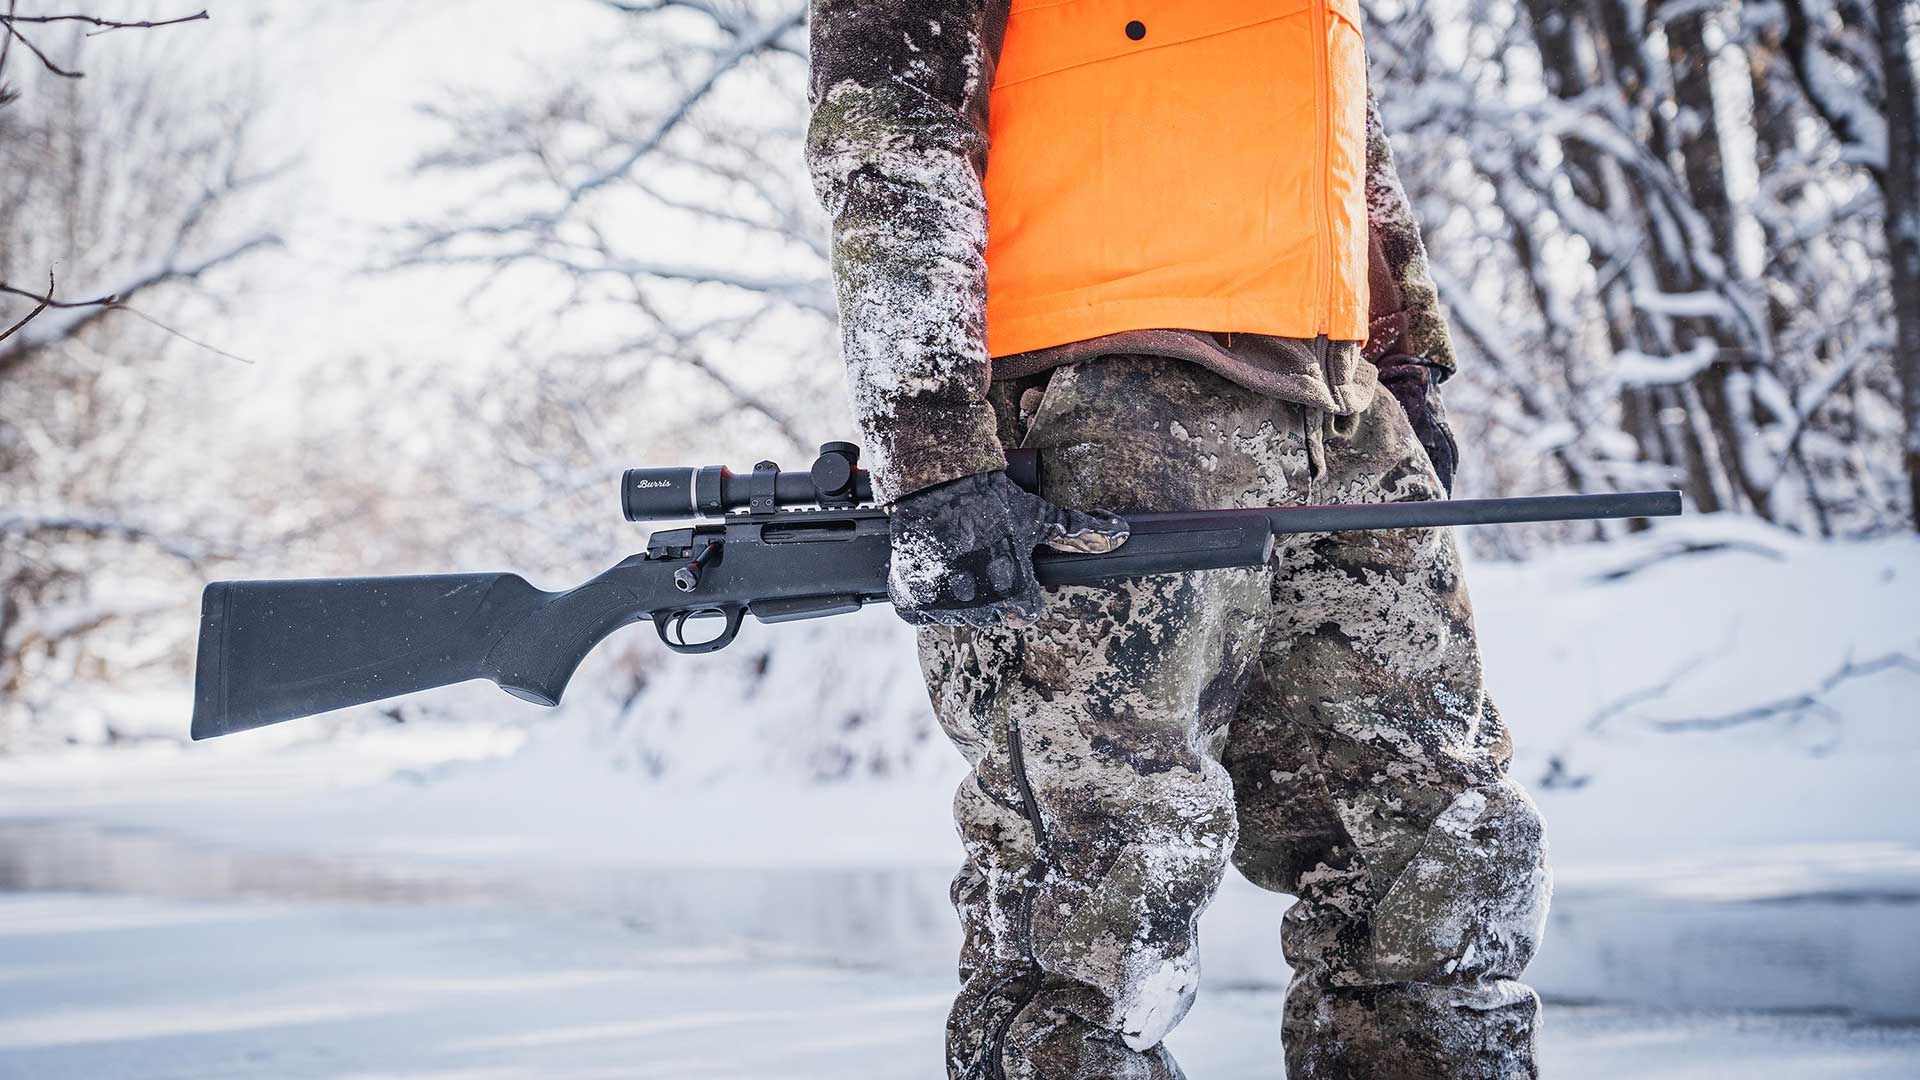 A camouflaged hunter wearing an orange safety vest carries his black Savage 334 bolt-action rifle alongside a frozen river in a snowy winter scene.